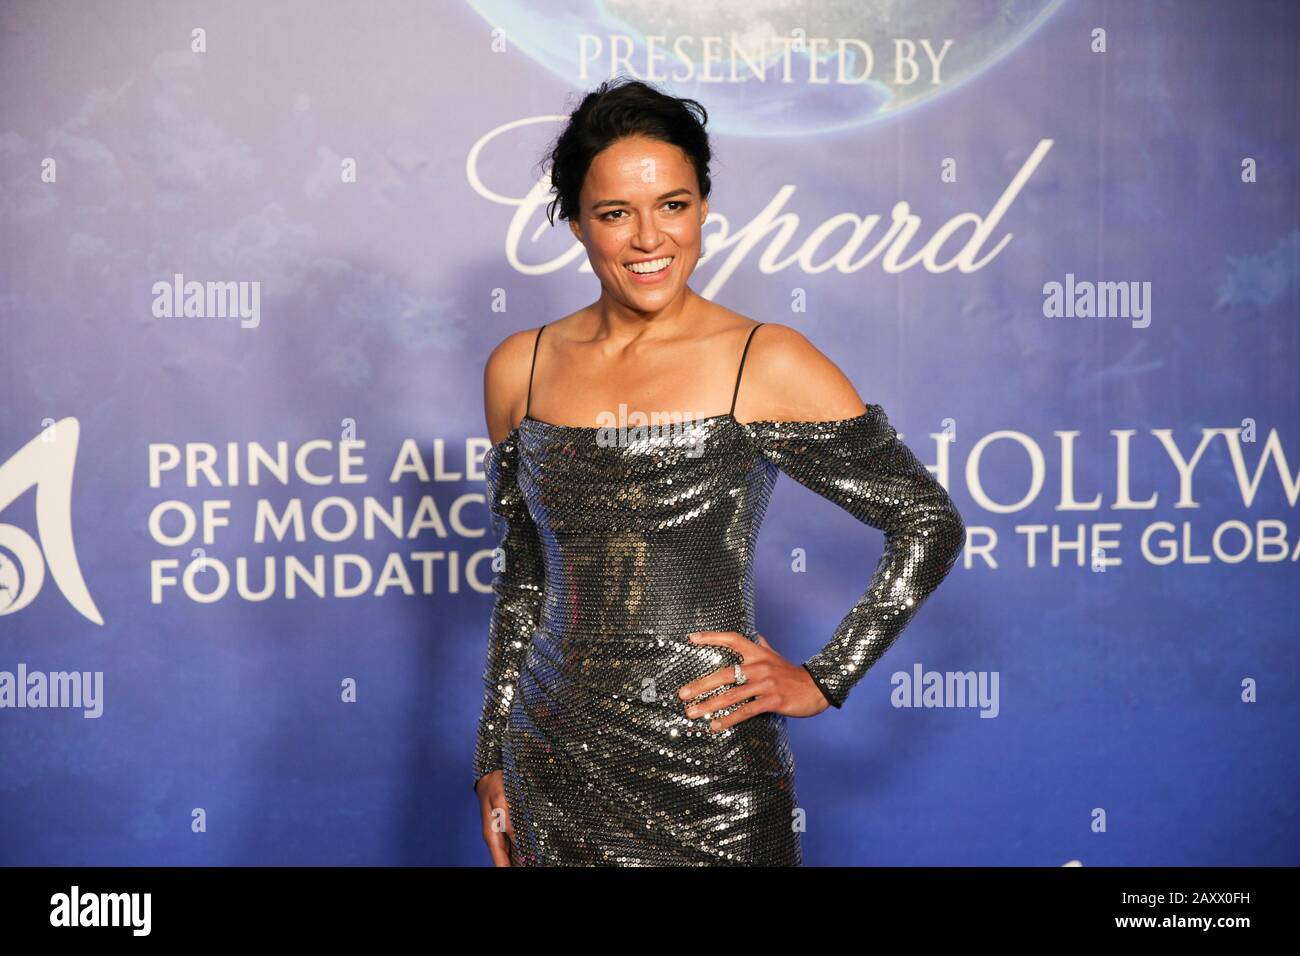 Actress Michelle Rodriguez attends Hollywood for the Global Ocean Gala at Beverly Hills on February 6, 2020 in Los Angeles, California. Stock Photo